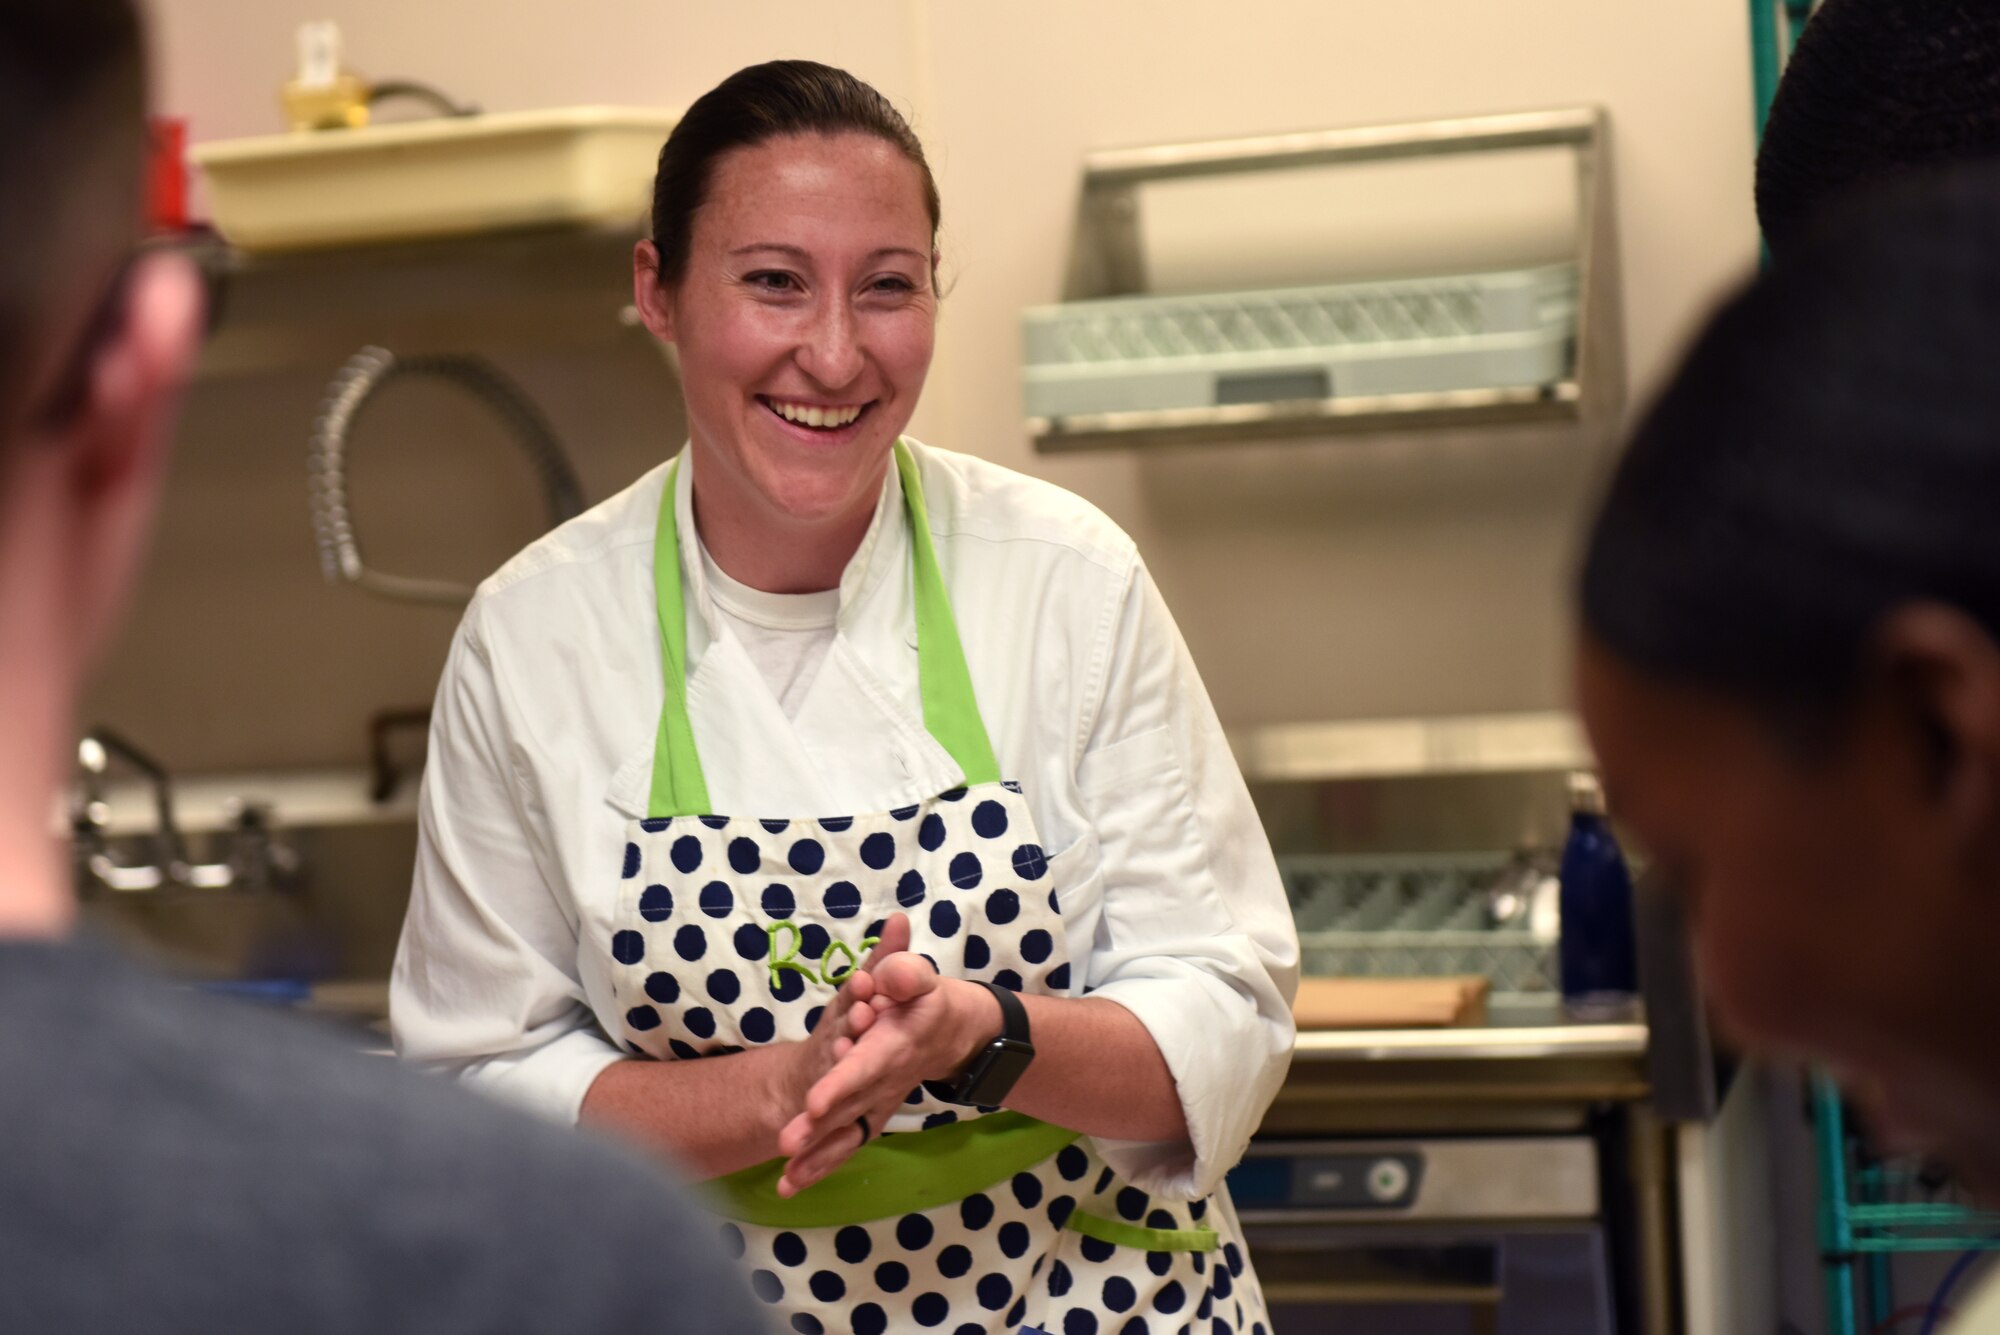 U.S. Air Force Staff Sgt. Roz Beeston, Second Air Force enlisted aid, teaches cooking techniques at the Dorm to Gourmet cooking class inside the McBride Commons on Keesler Air Force Base, Sept. 5, 2019. The cooking class was held to not only improve the cooking skills of Airmen but to build team connection and resiliency. (U.S. Air Force photo by Airman Seth Haddix)